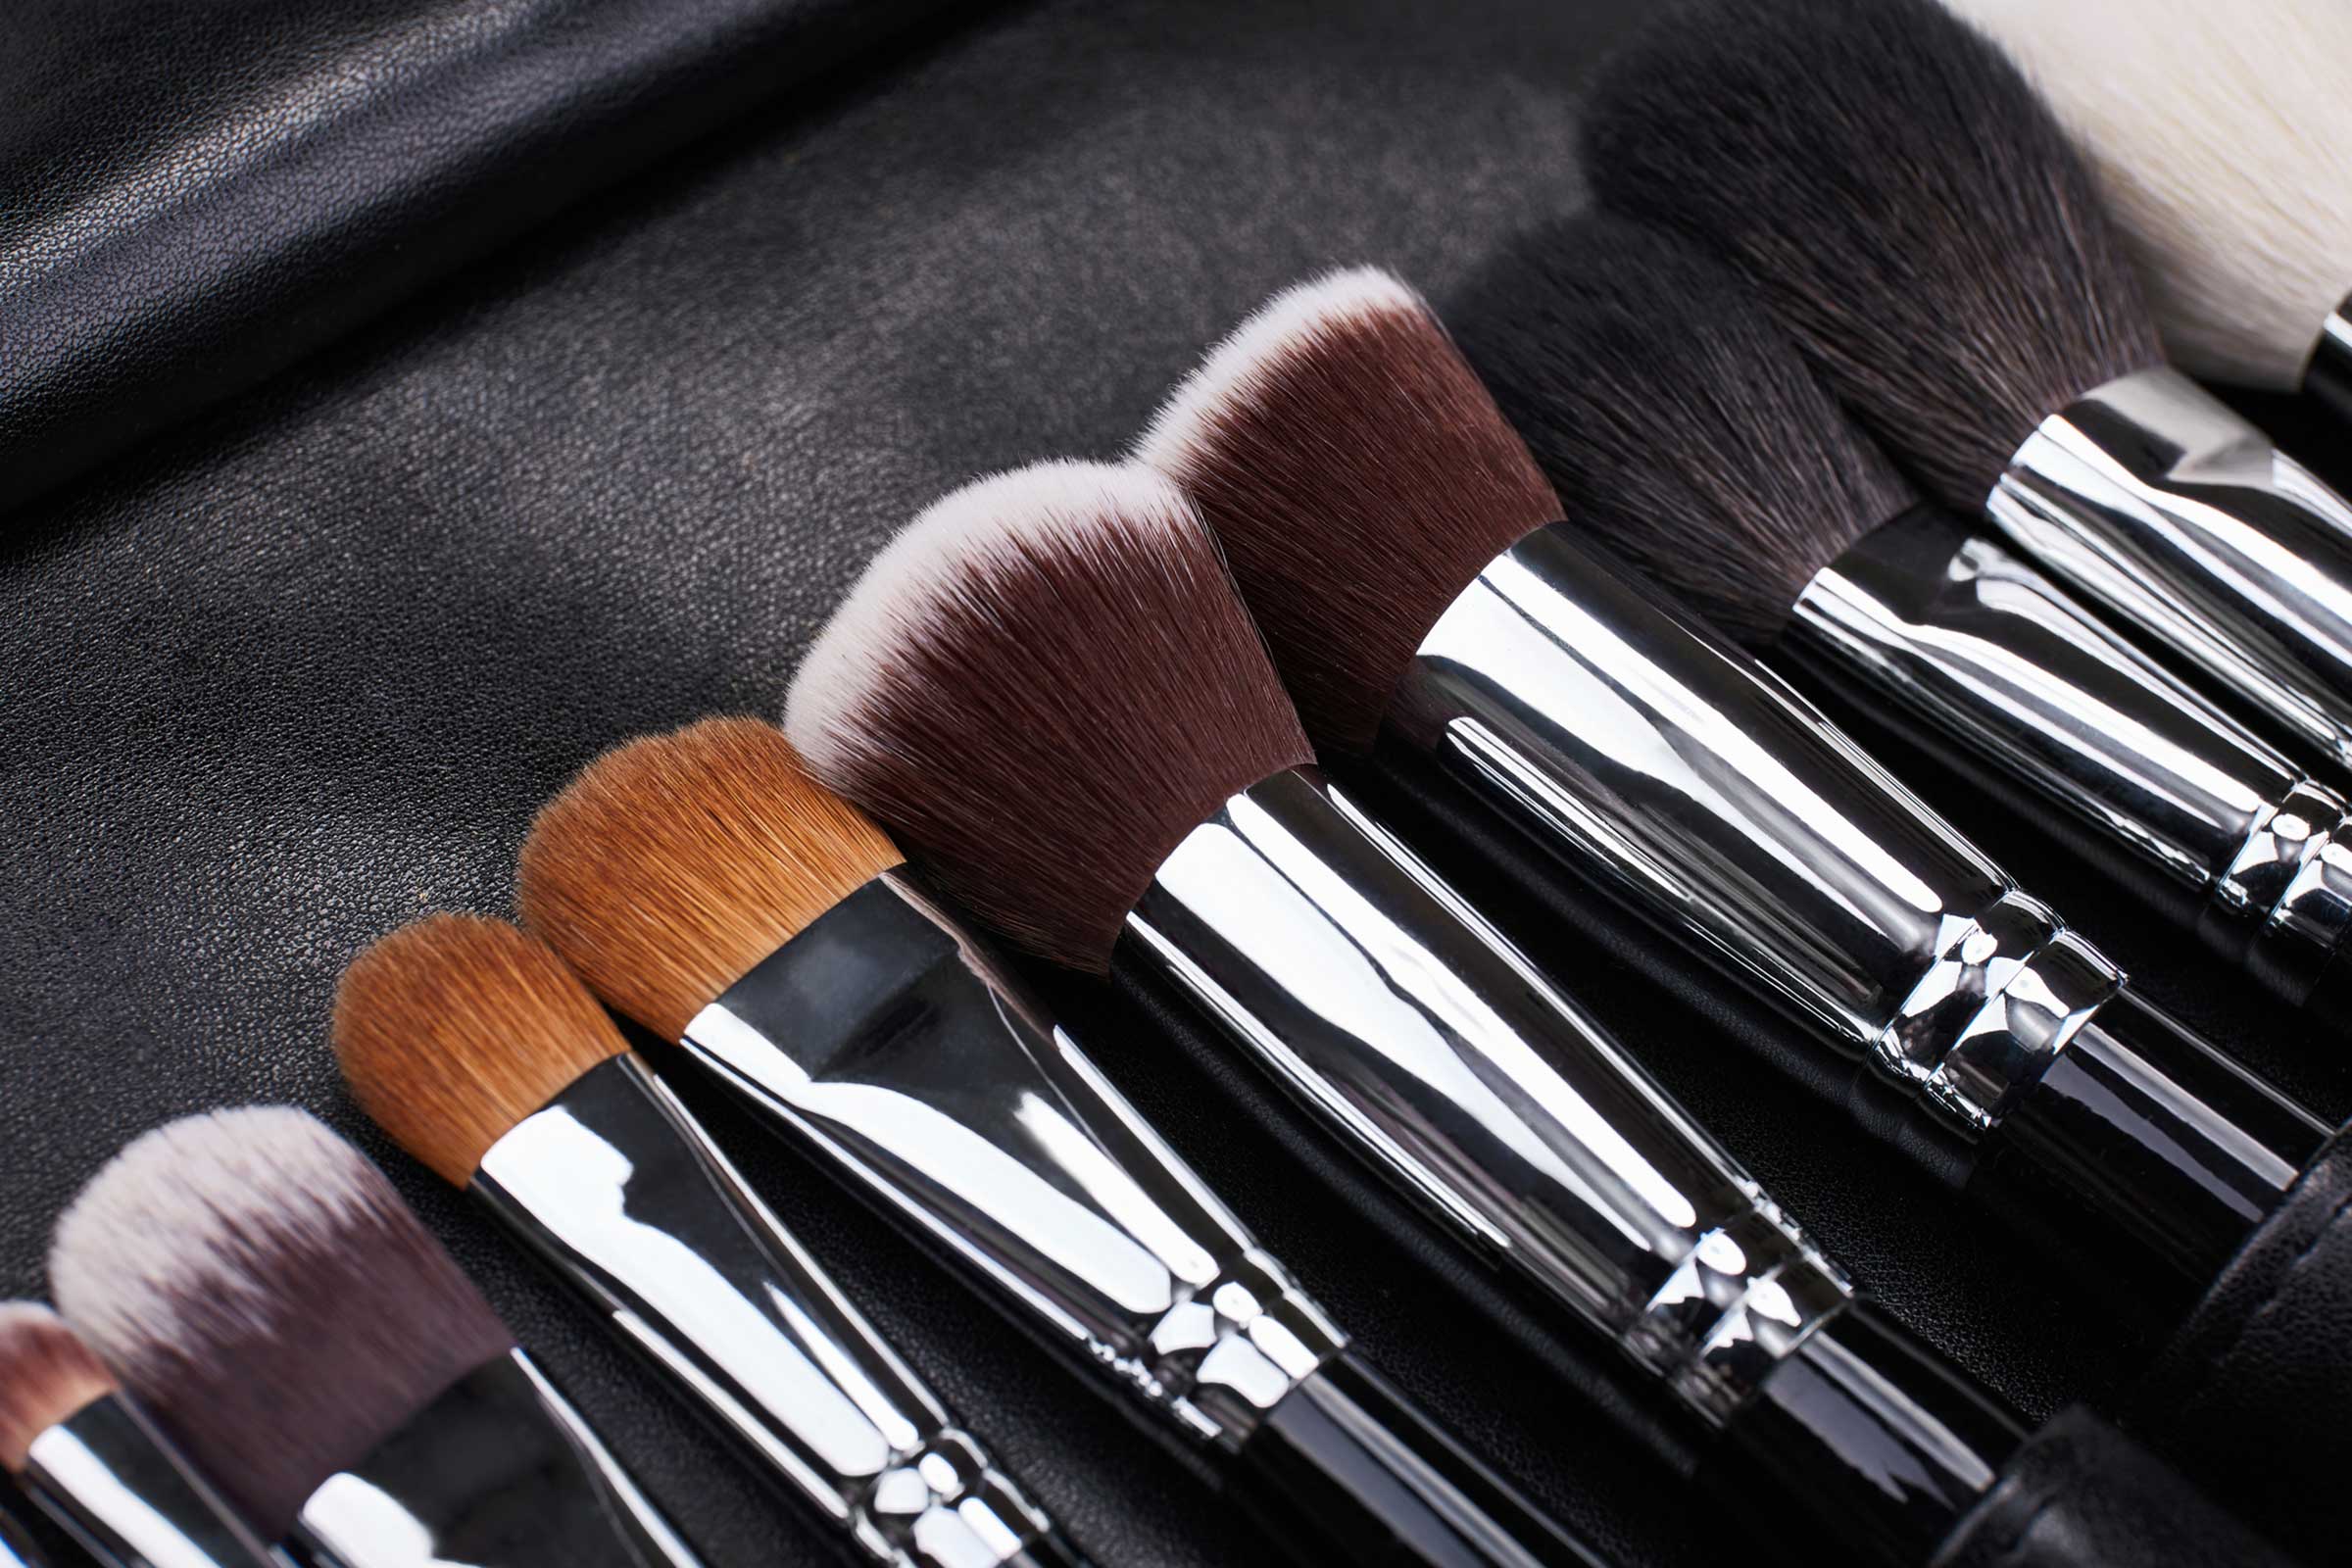 8 Rules for Having Sanitary Makeup and Beauty Tools